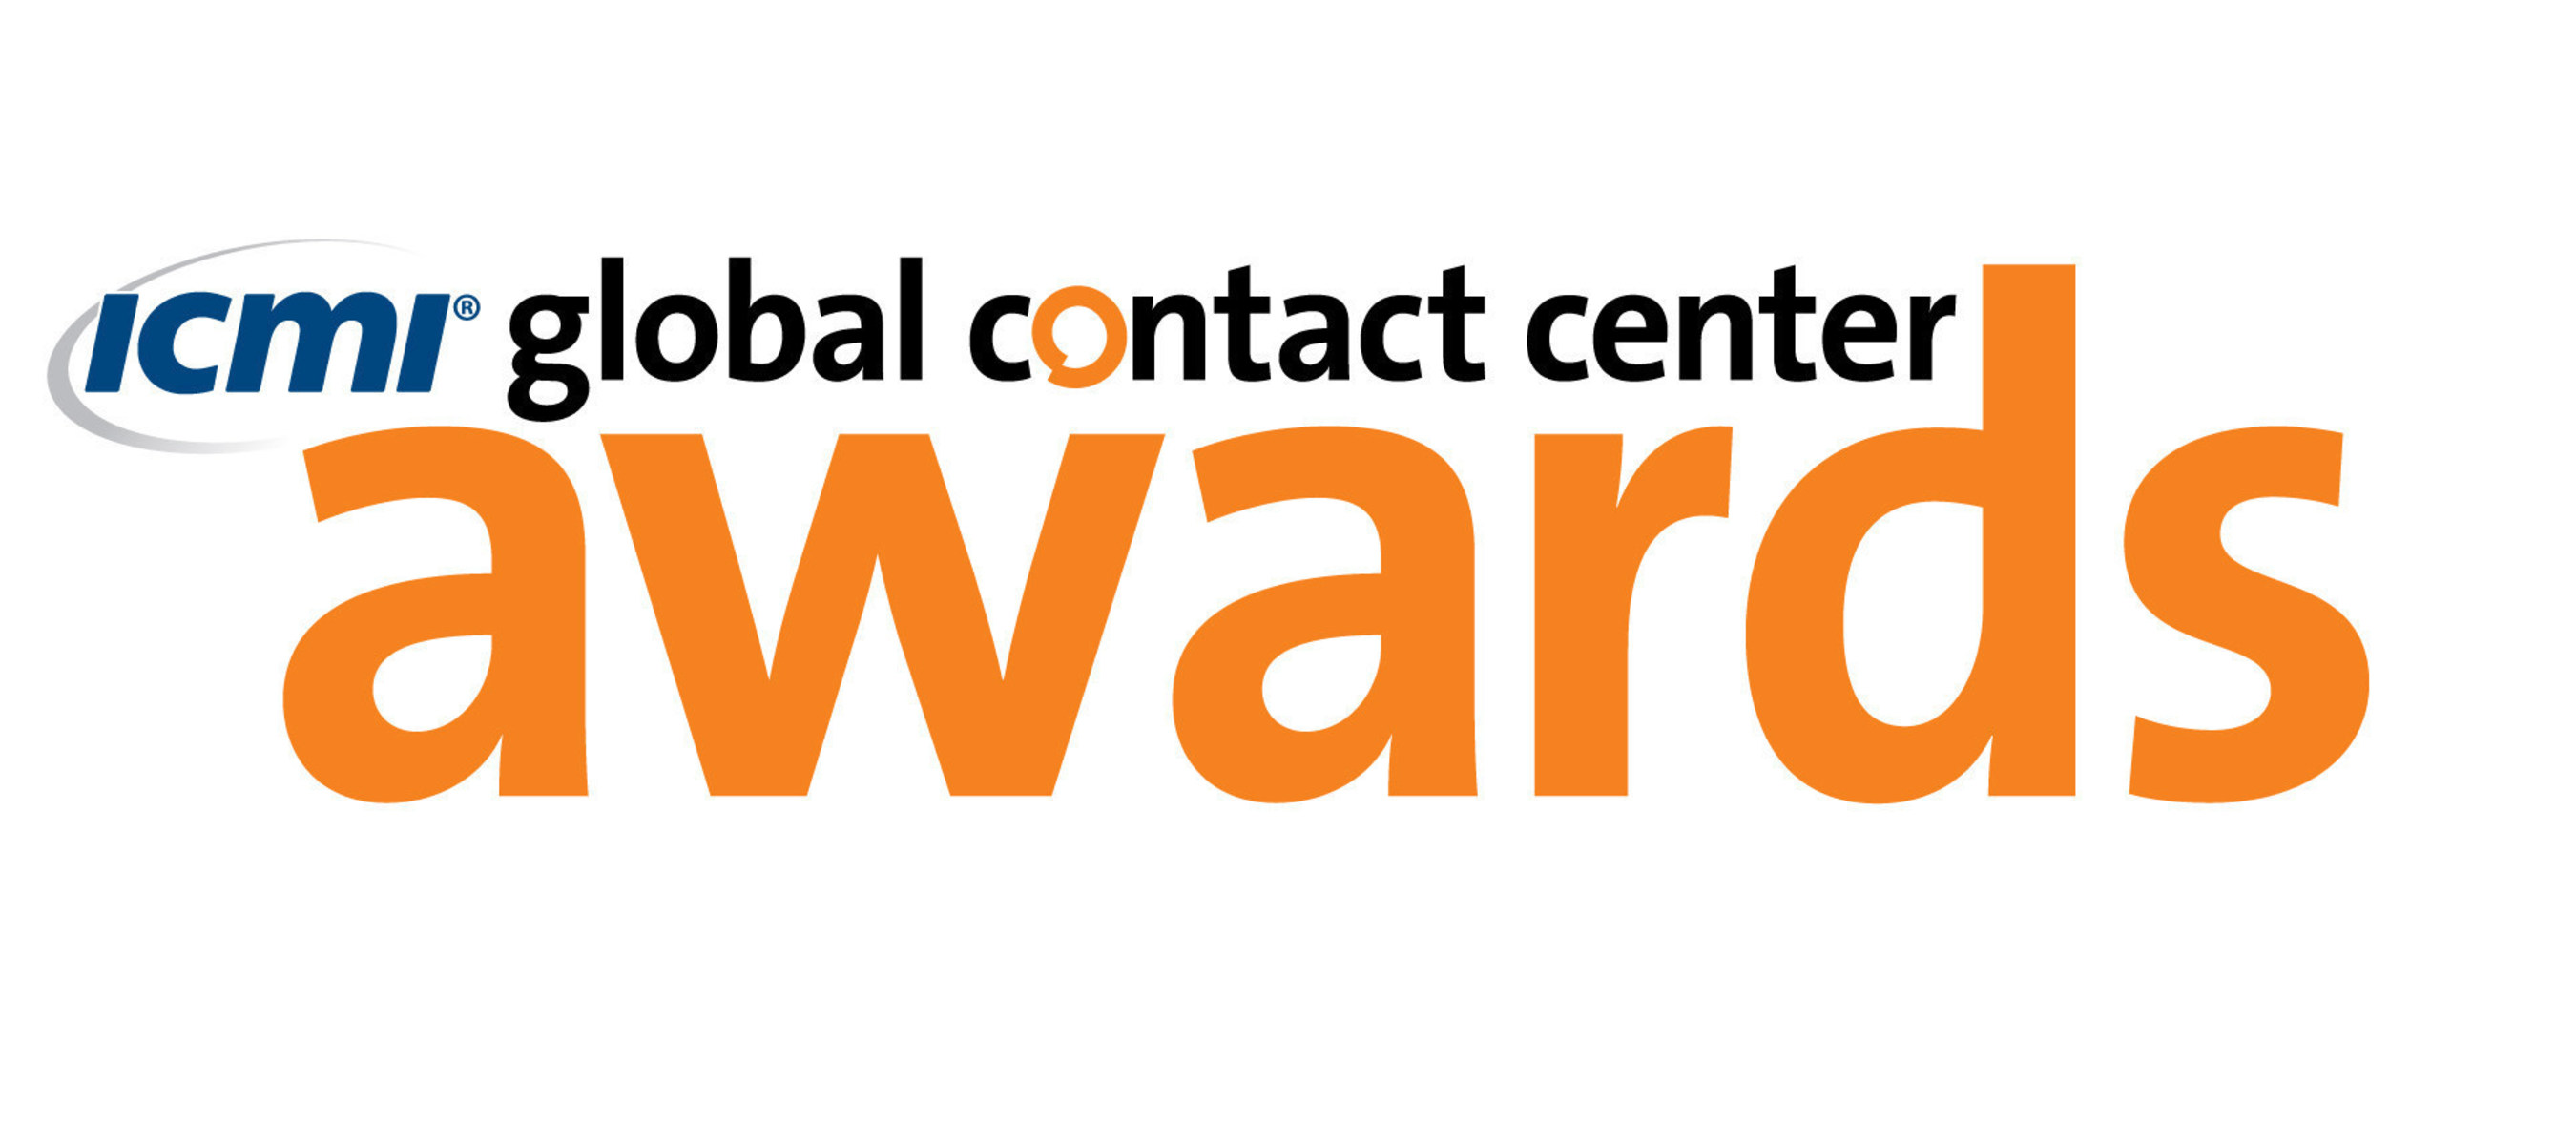 Winners of Global Contact Center Awards will be honored at a ceremony held during the 2016 Contact Center Expo & Conference.